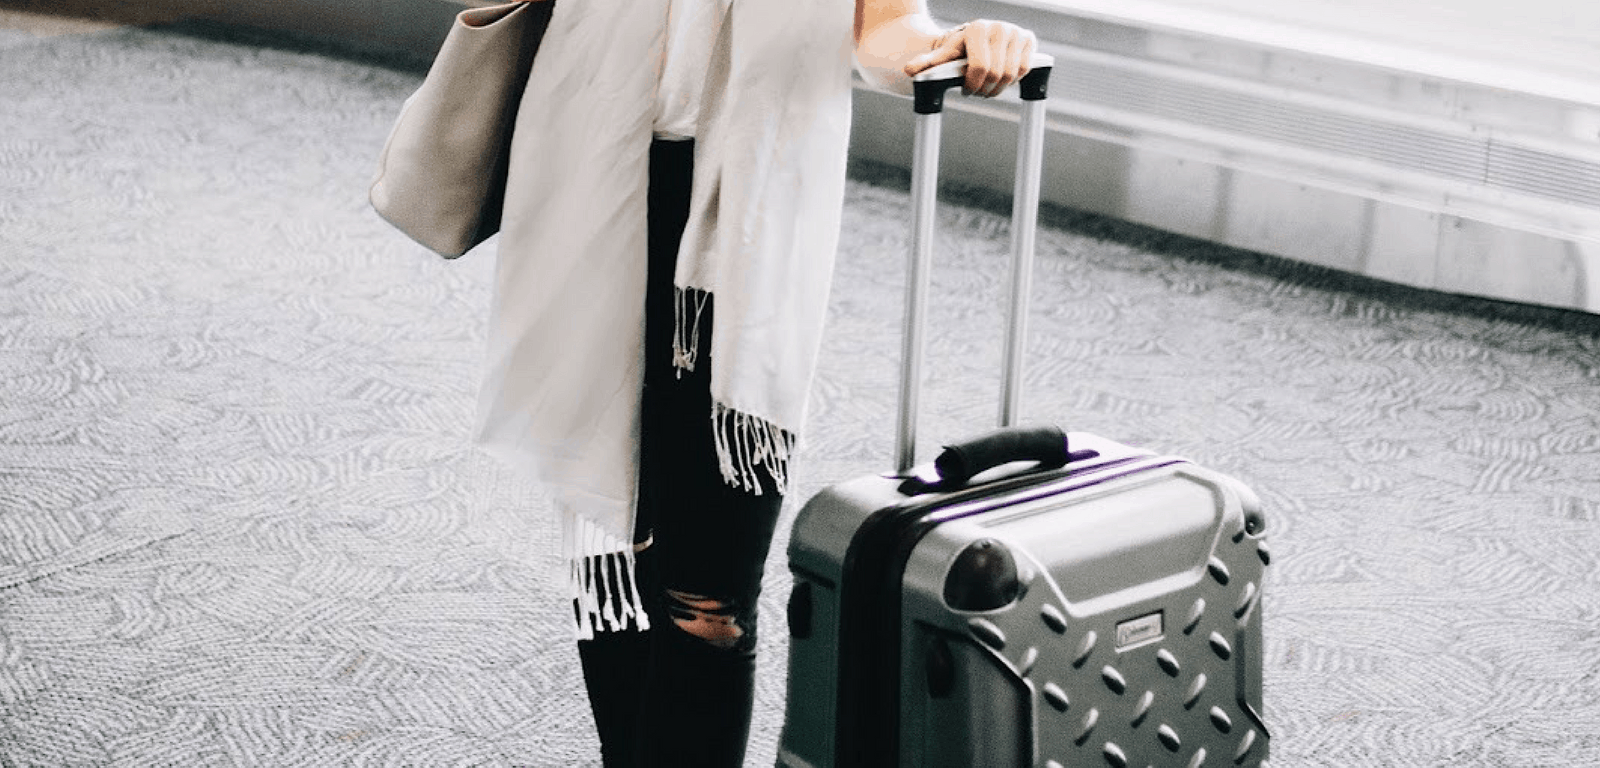 6 AIRPORT TIPS THAT WILL CHANGE HOW YOU TRAVEL + AN OUTFIT - By Sophia Lee